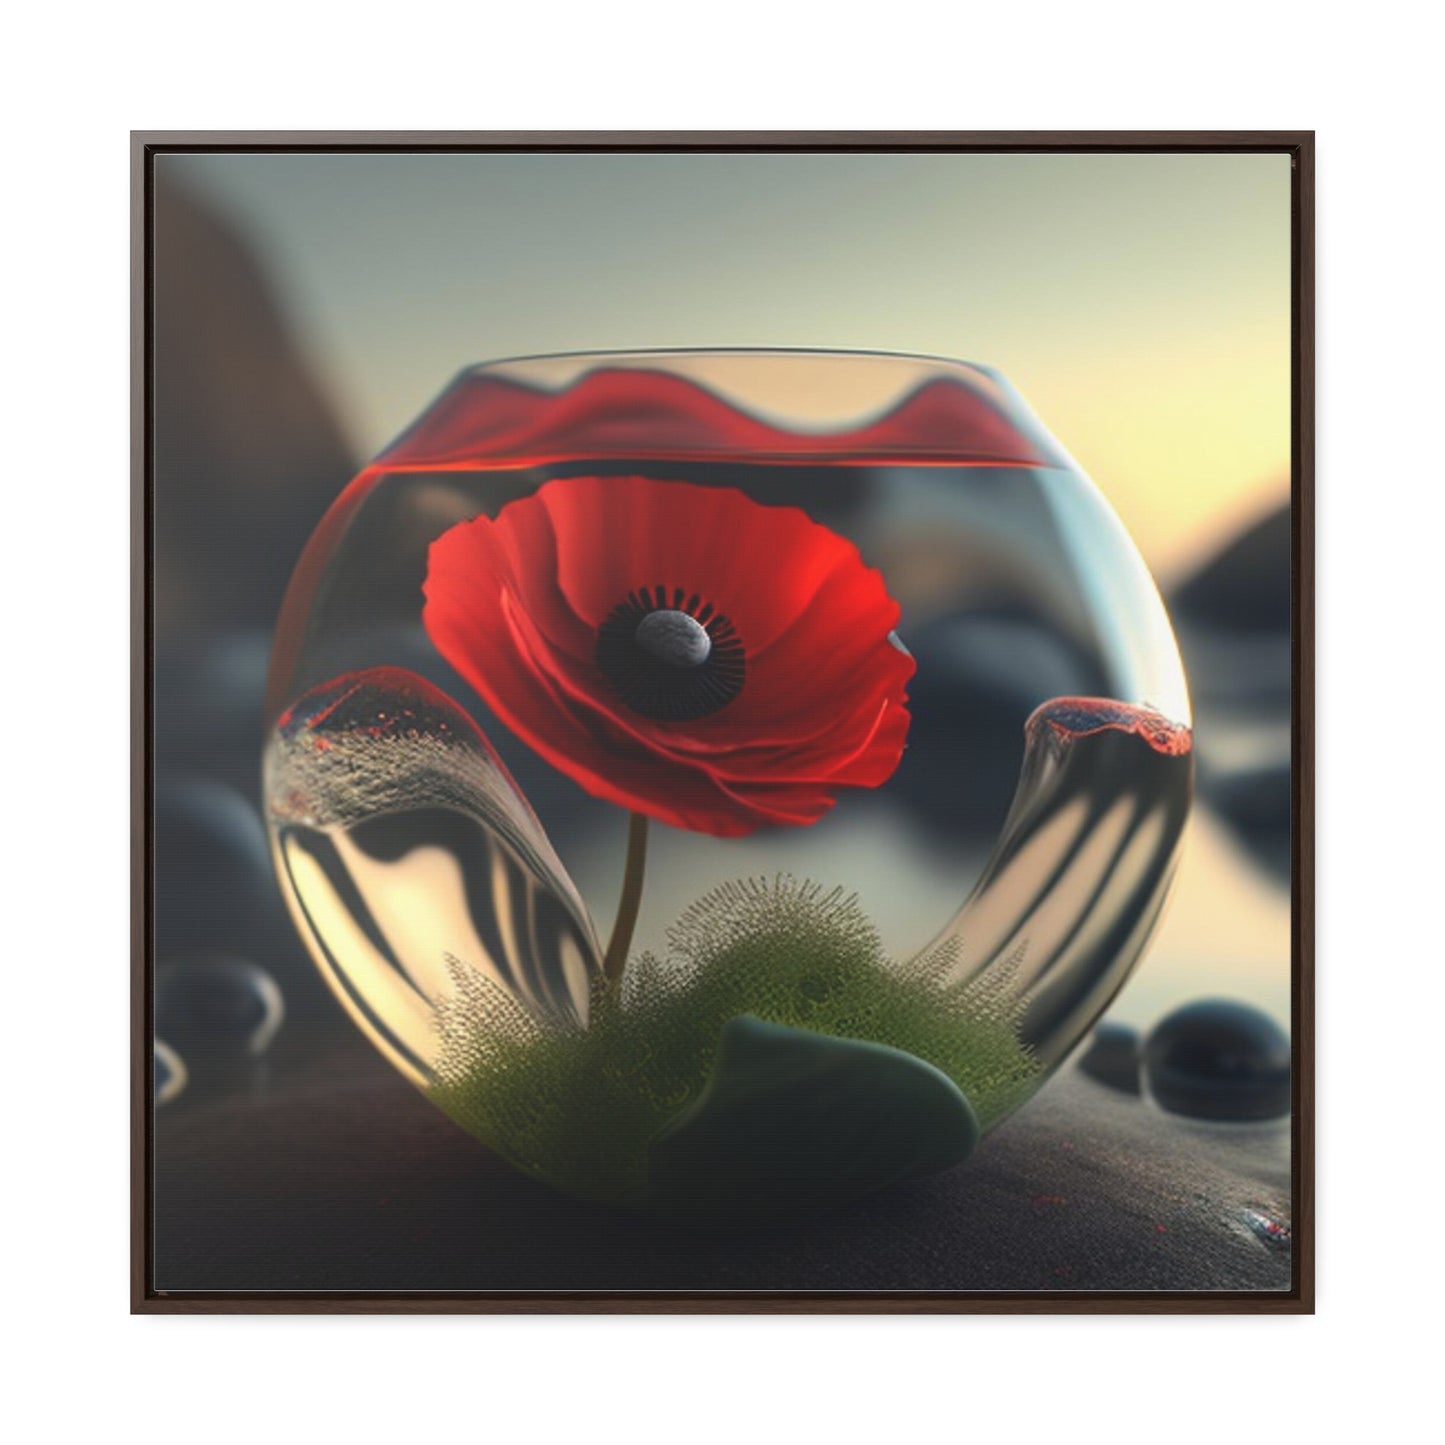 Gallery Canvas Wraps, Square Frame Red Anemone in a Vase 3